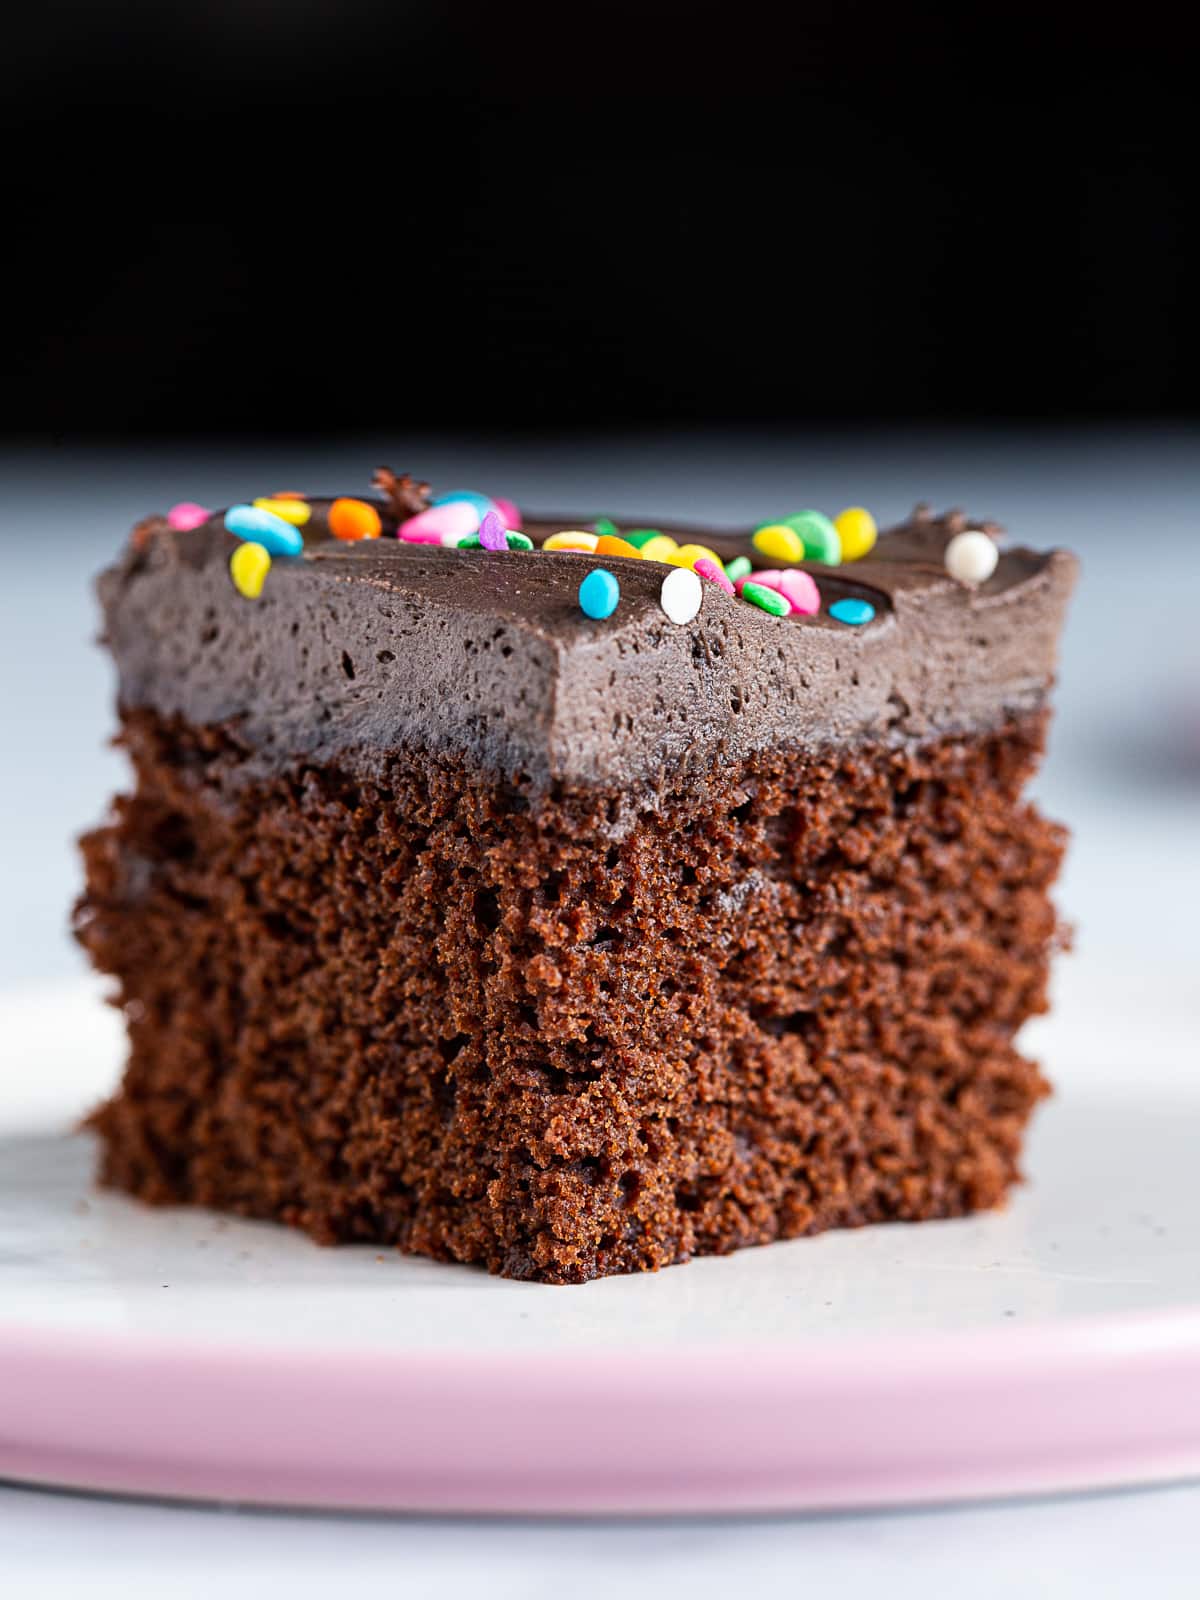 Chocolate Pound Cake - Del's cooking twist